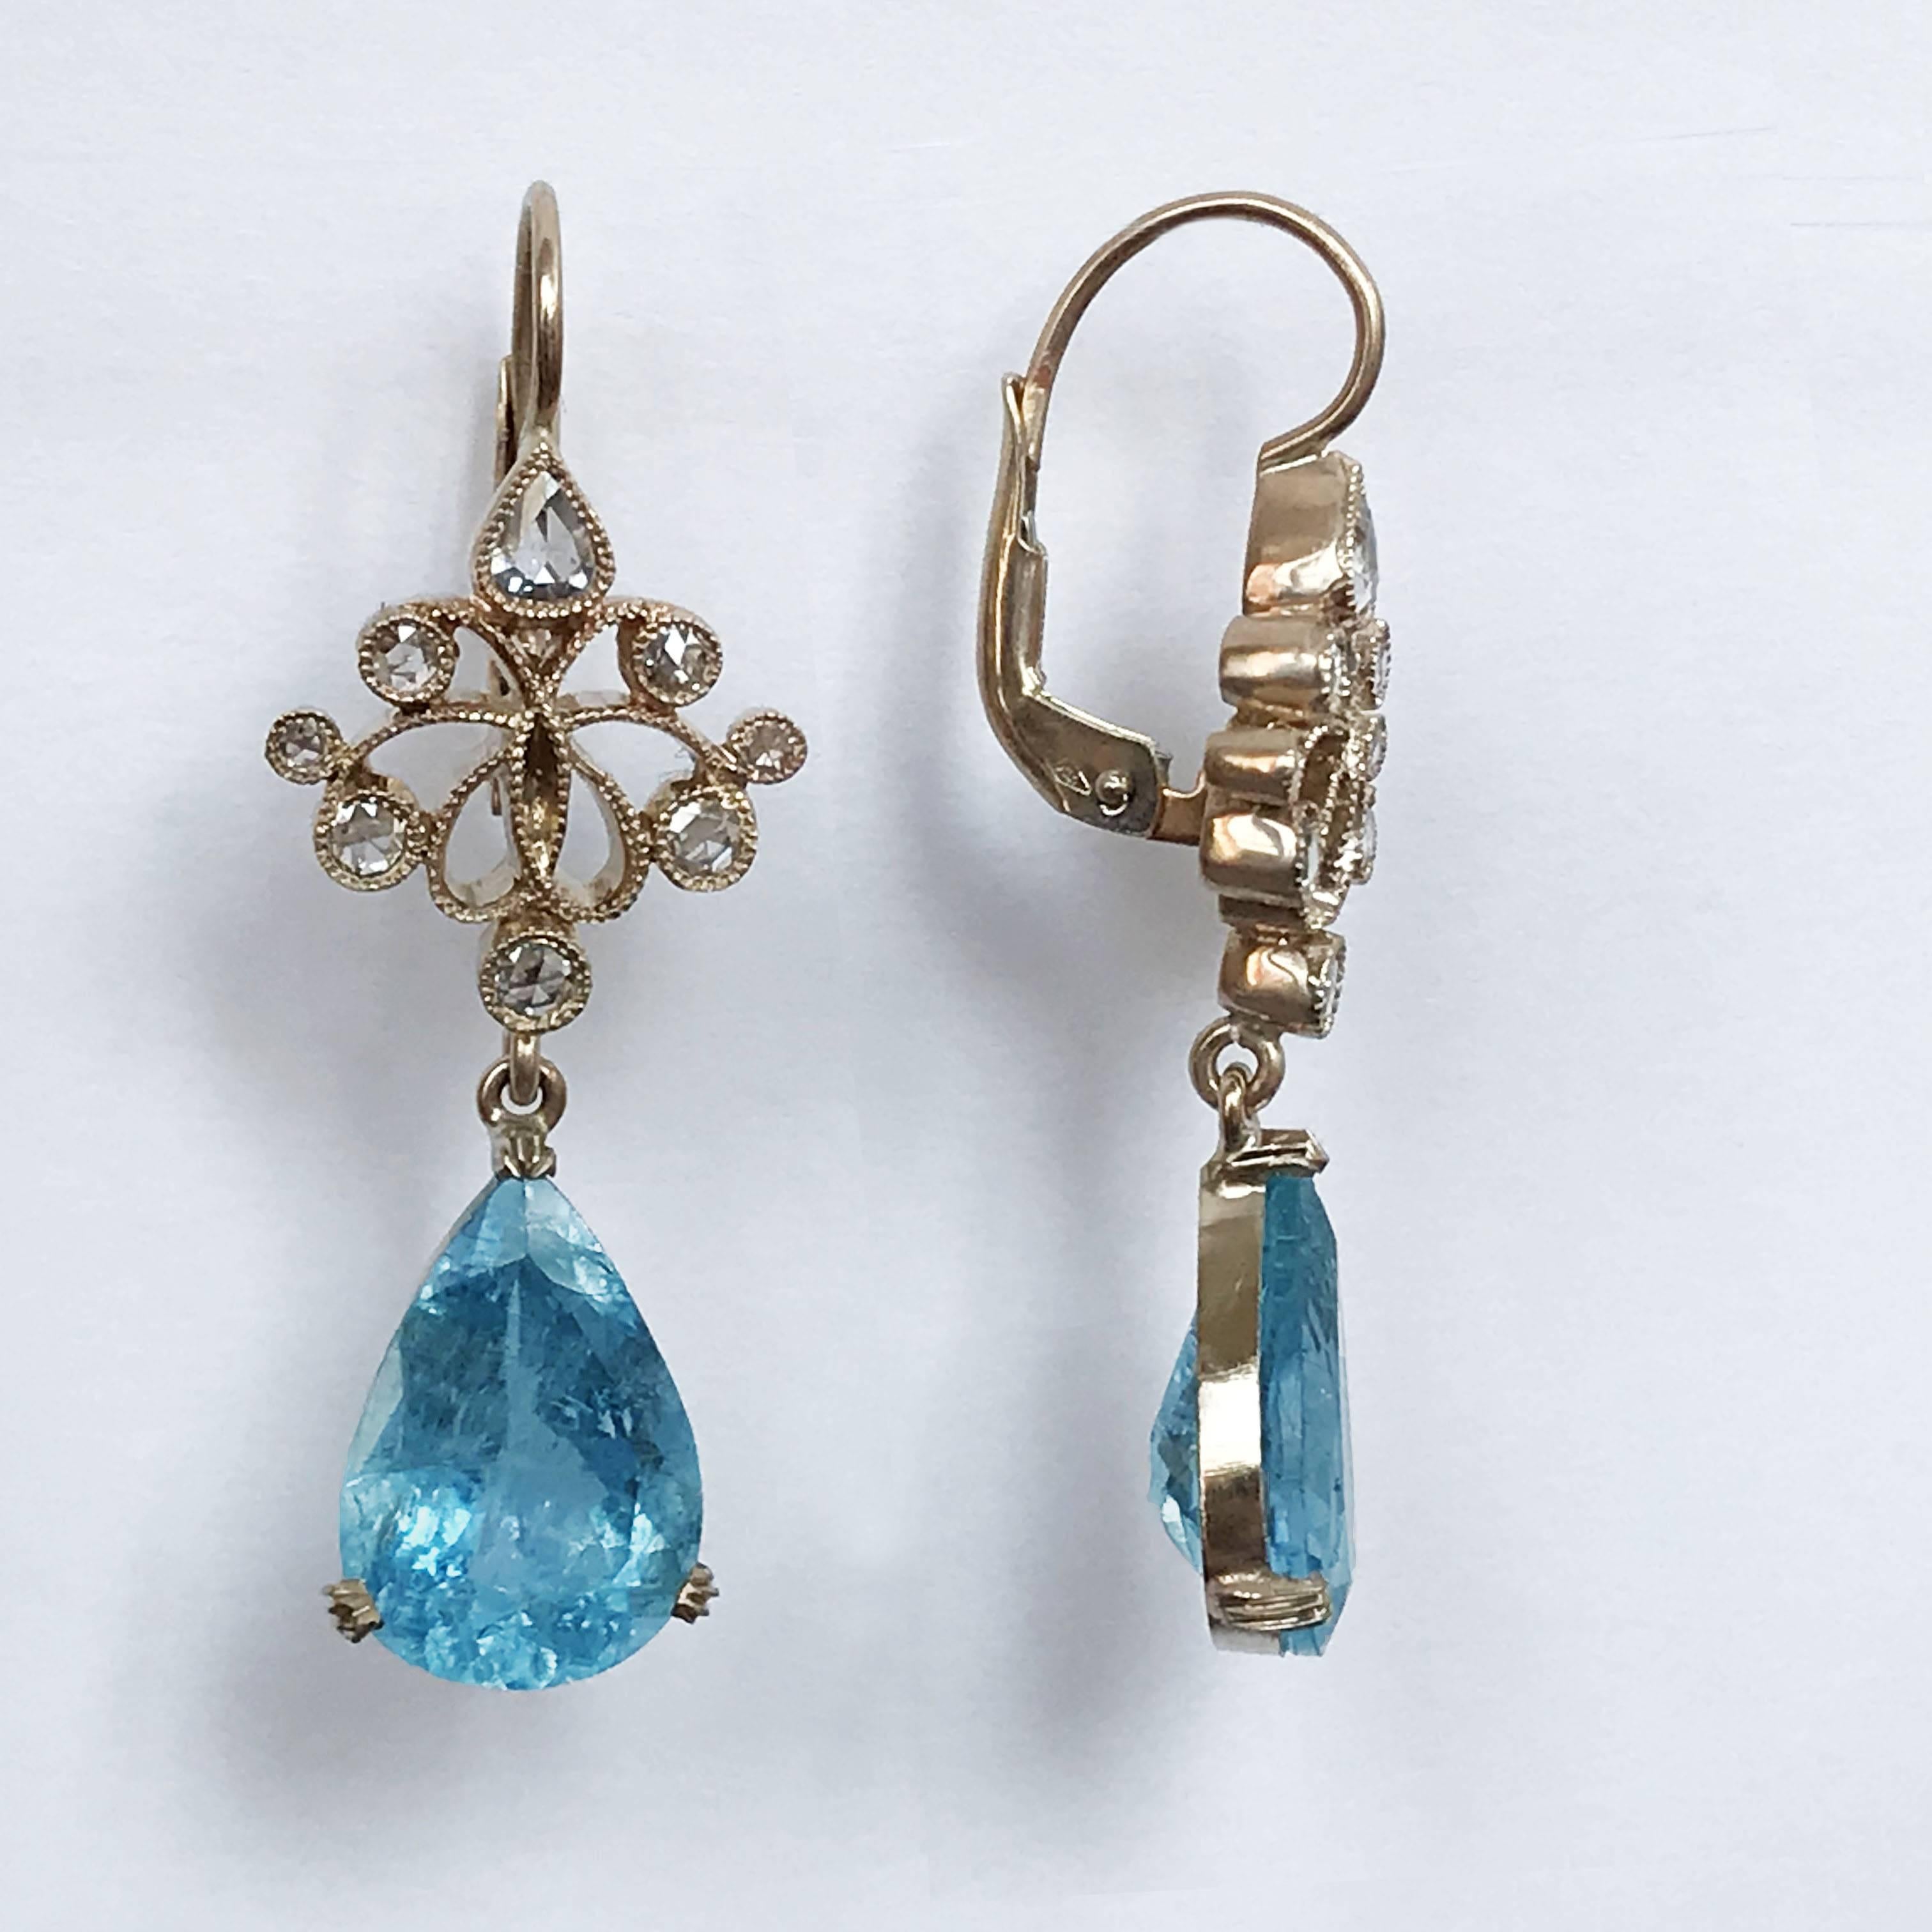 Dalben design Aquamarine And Diamond pendant earrings mounted in 18 kt white gold.
Two Pear cut Aquamarine weighting  carats 7,45 and 16 rose cut white Diamonds weighing 0,45 carats.
Earrings dimension: 
max width 13,8 mm ,  height without leverback